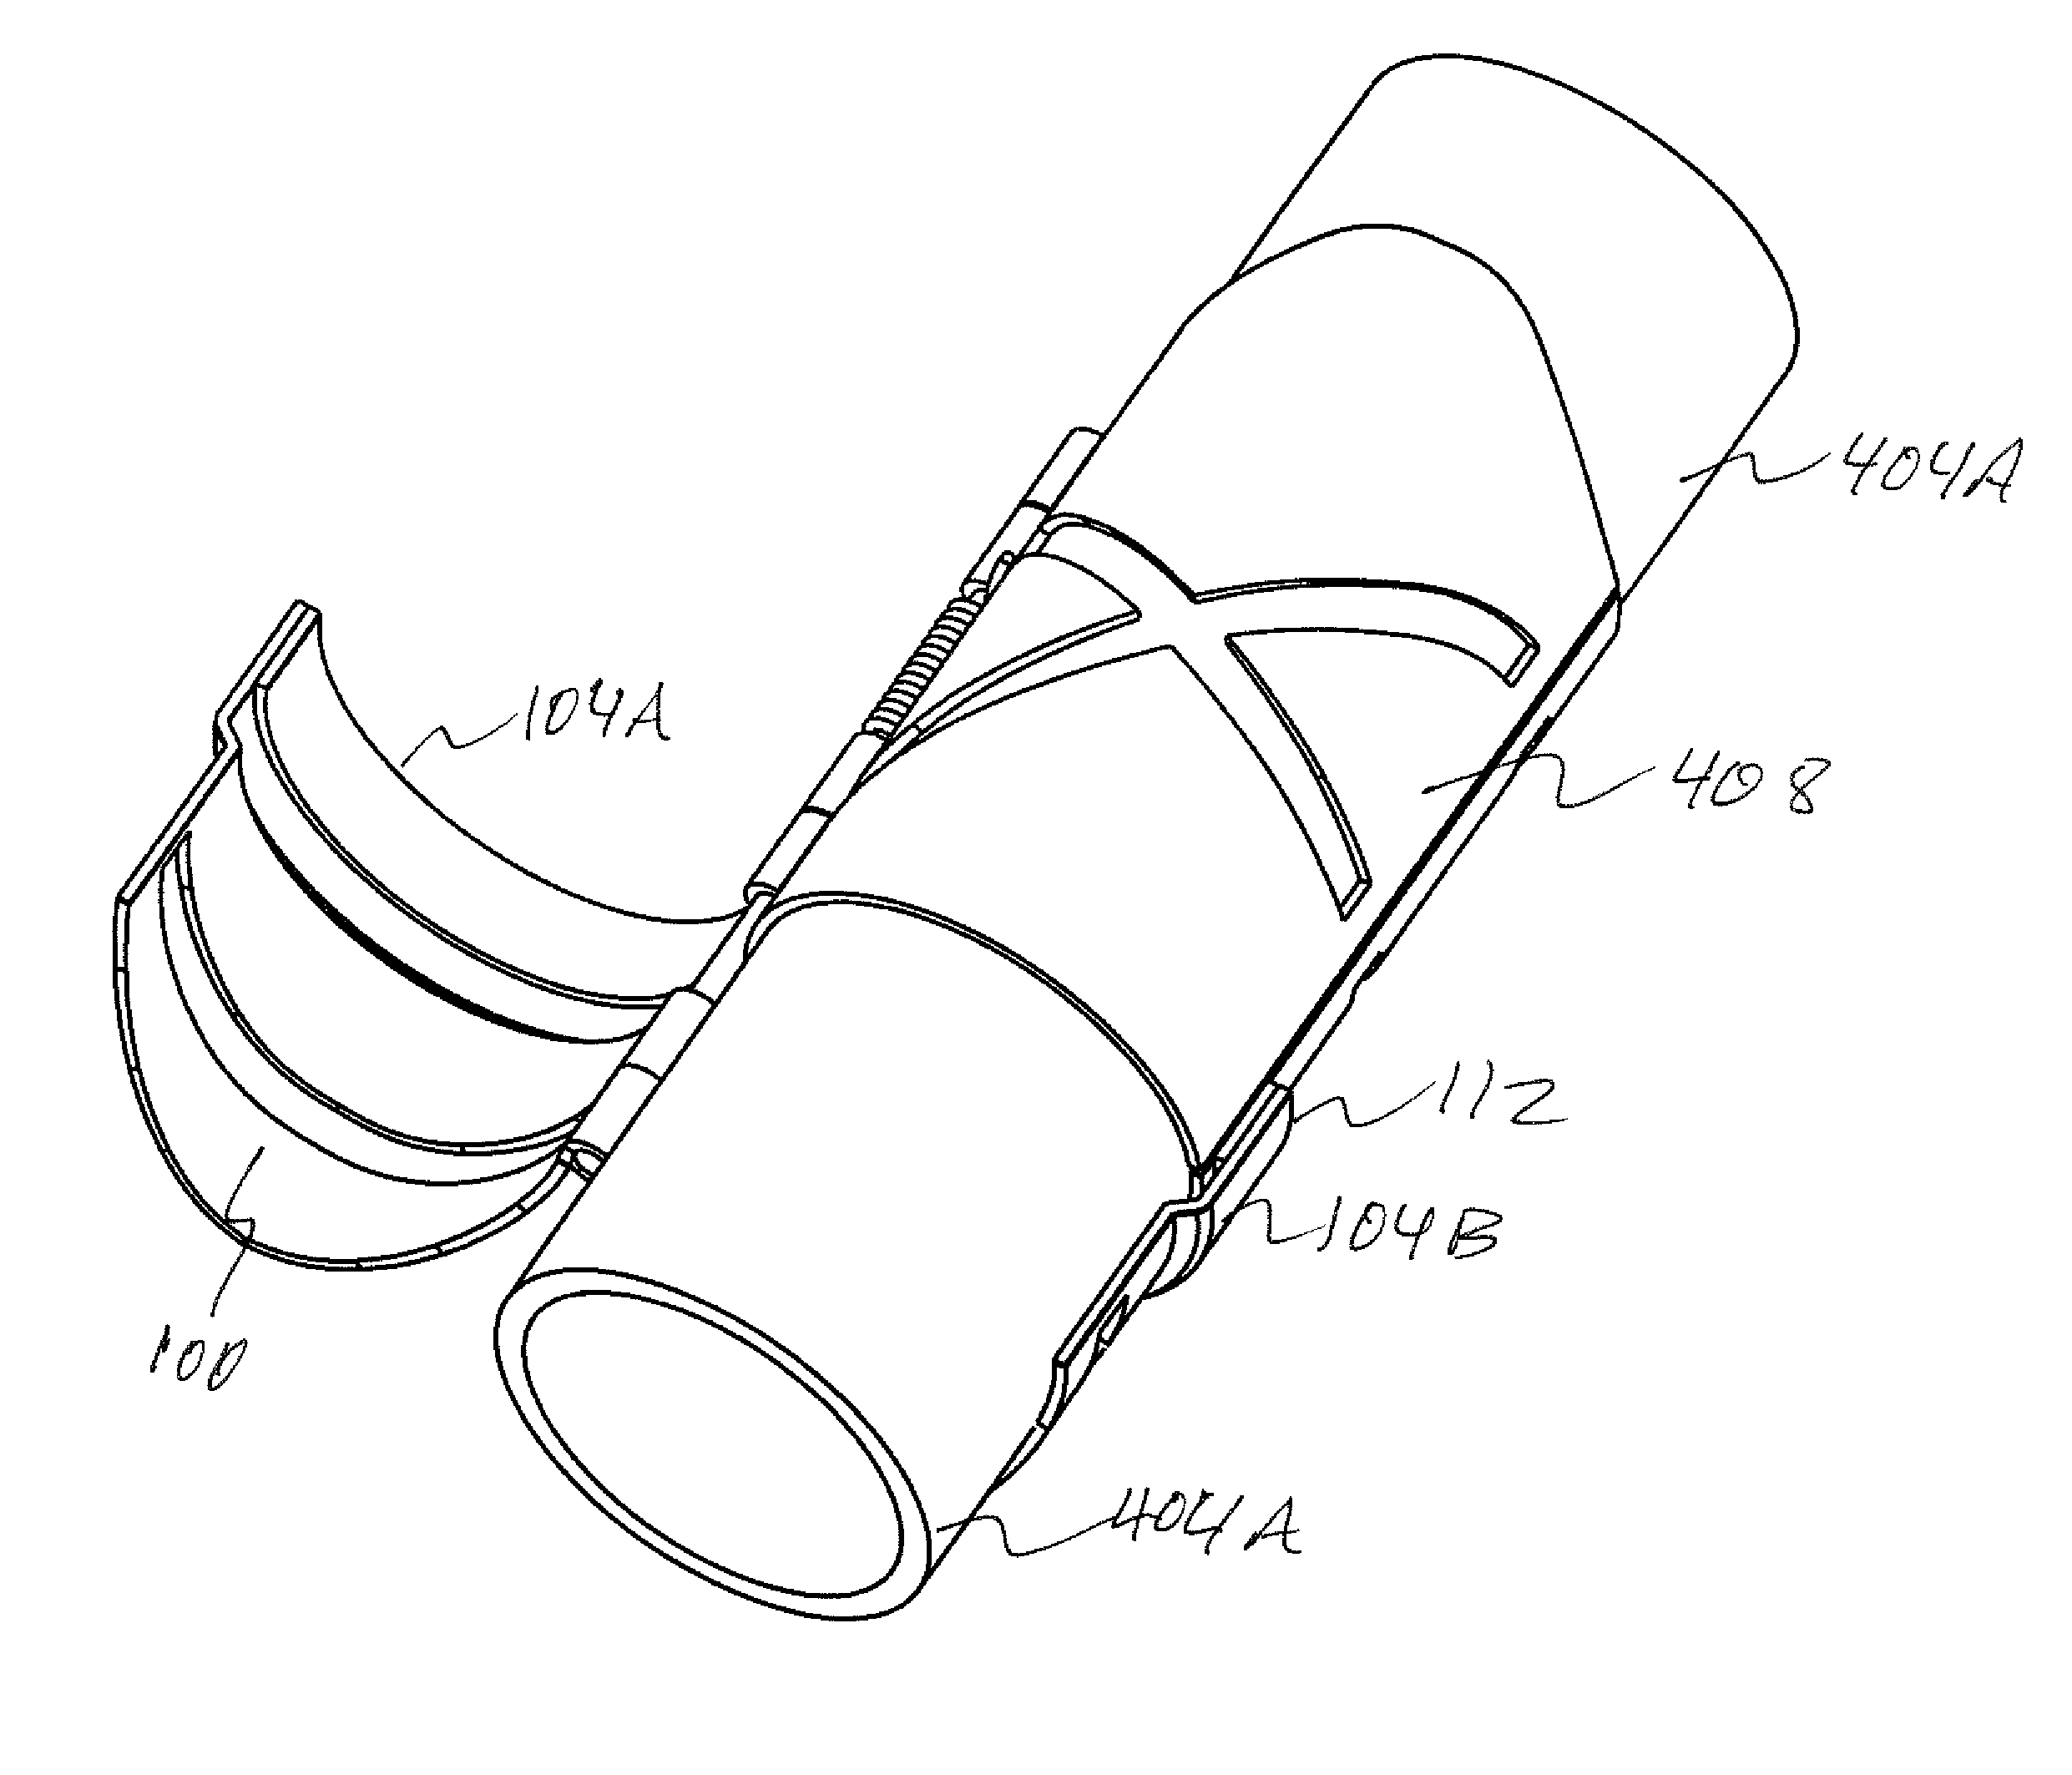 Pipe guide adapter